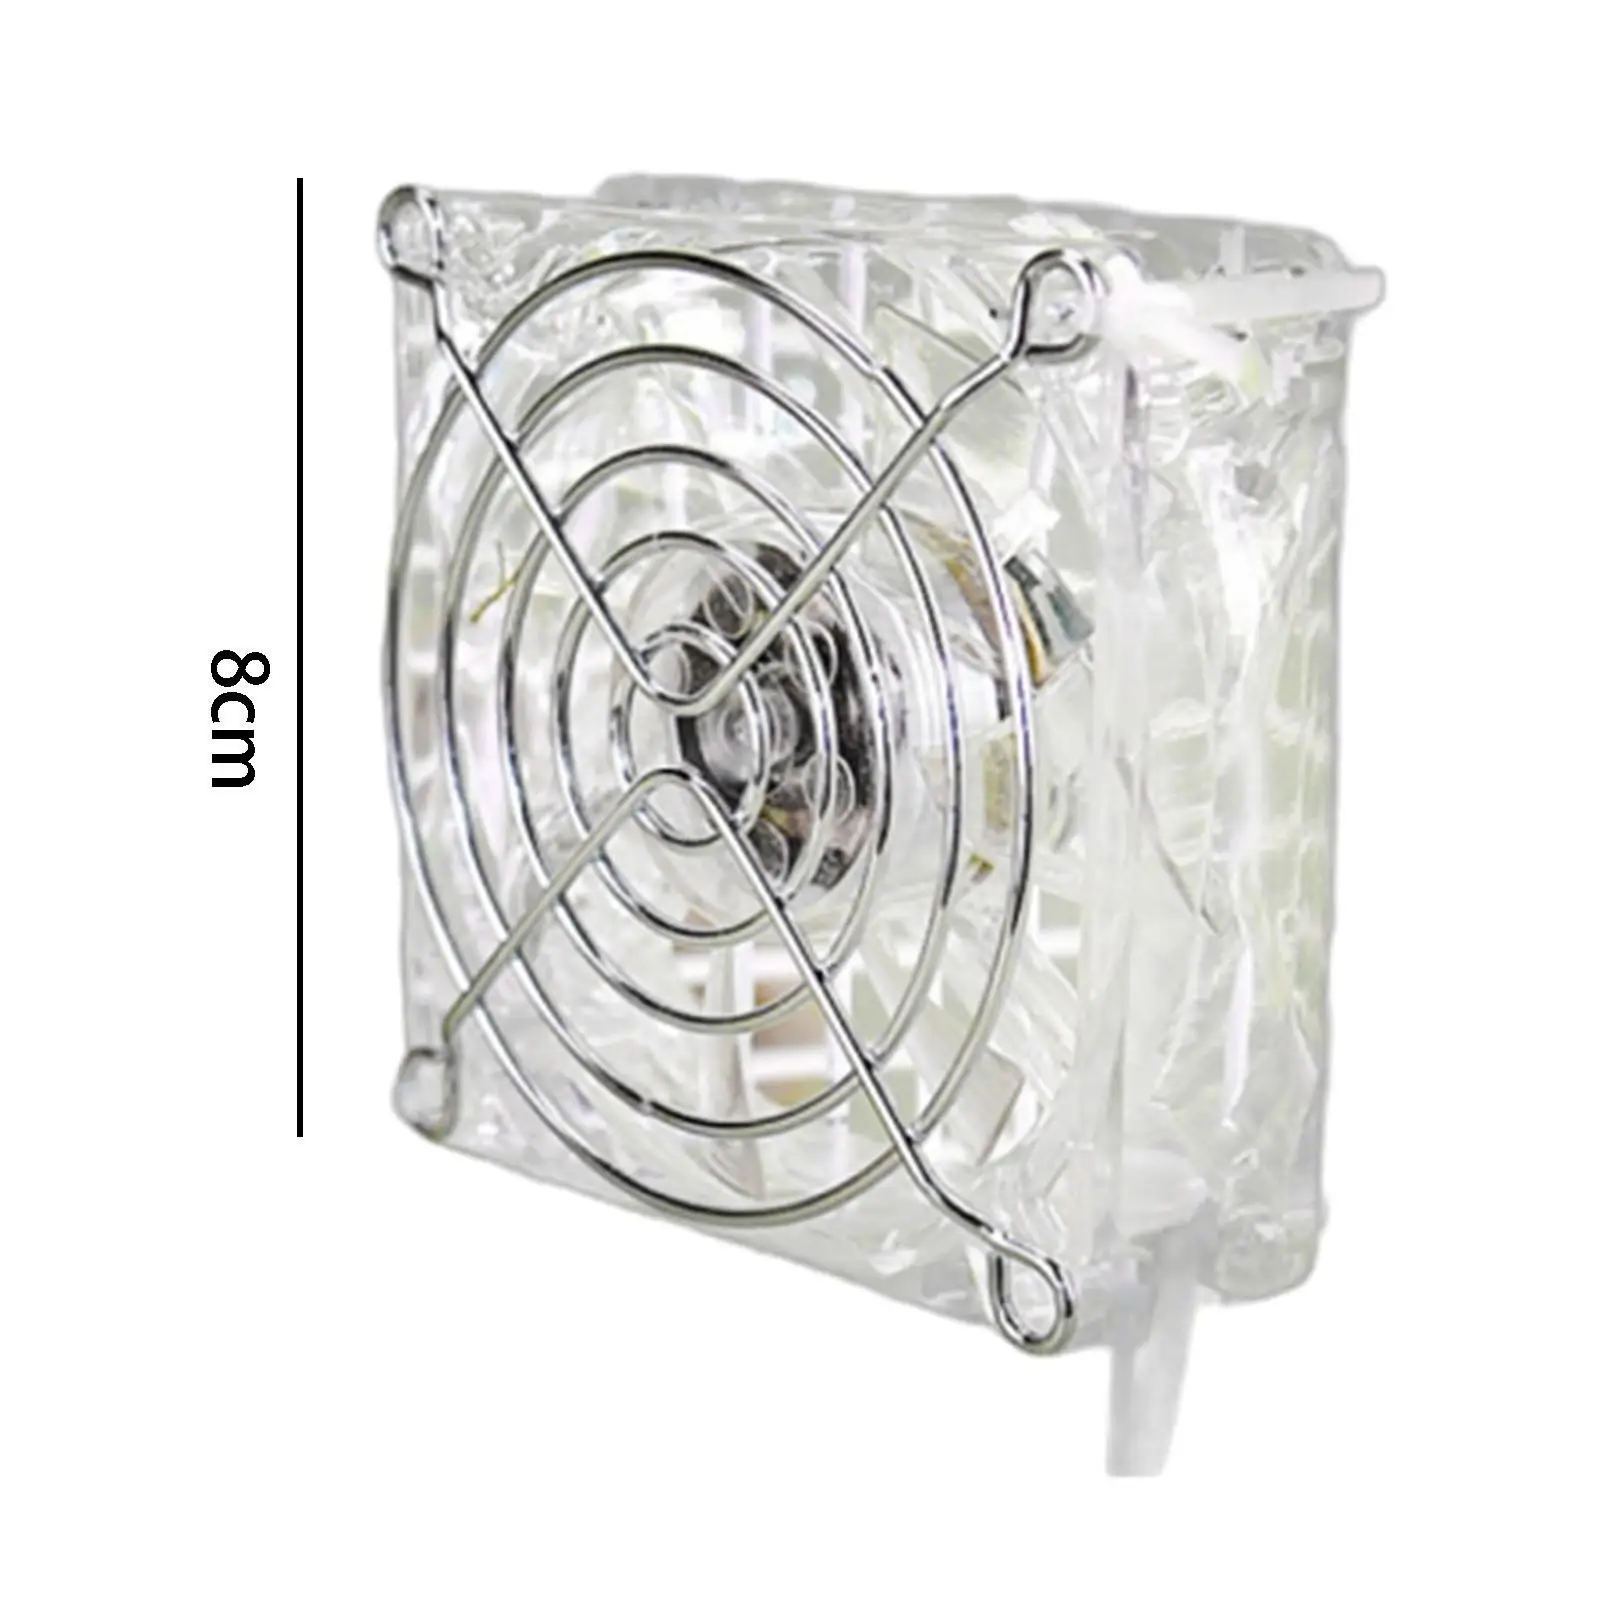 Hamster Cage Cooling Fan Acrylic Small Pet Cooling Fan to Keep Summer Cooling for Small Pet Rabbit Parrot Kittens Guinea Pig